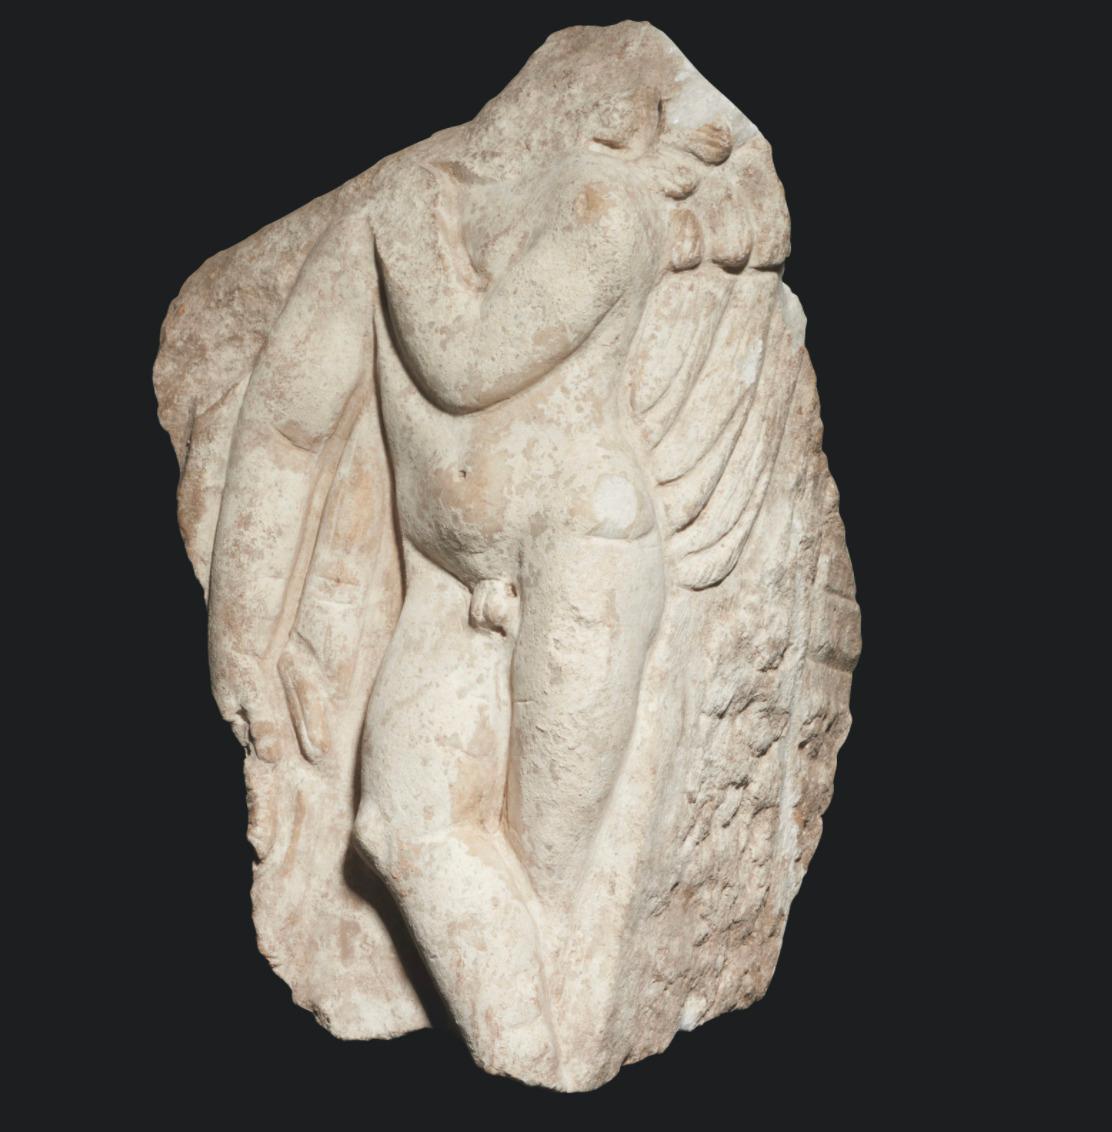 Unknown Figurative Sculpture - Ancient Roman Marble Altar Fragment with Cupid, Roman Empire, 2nd/3rd Century AD